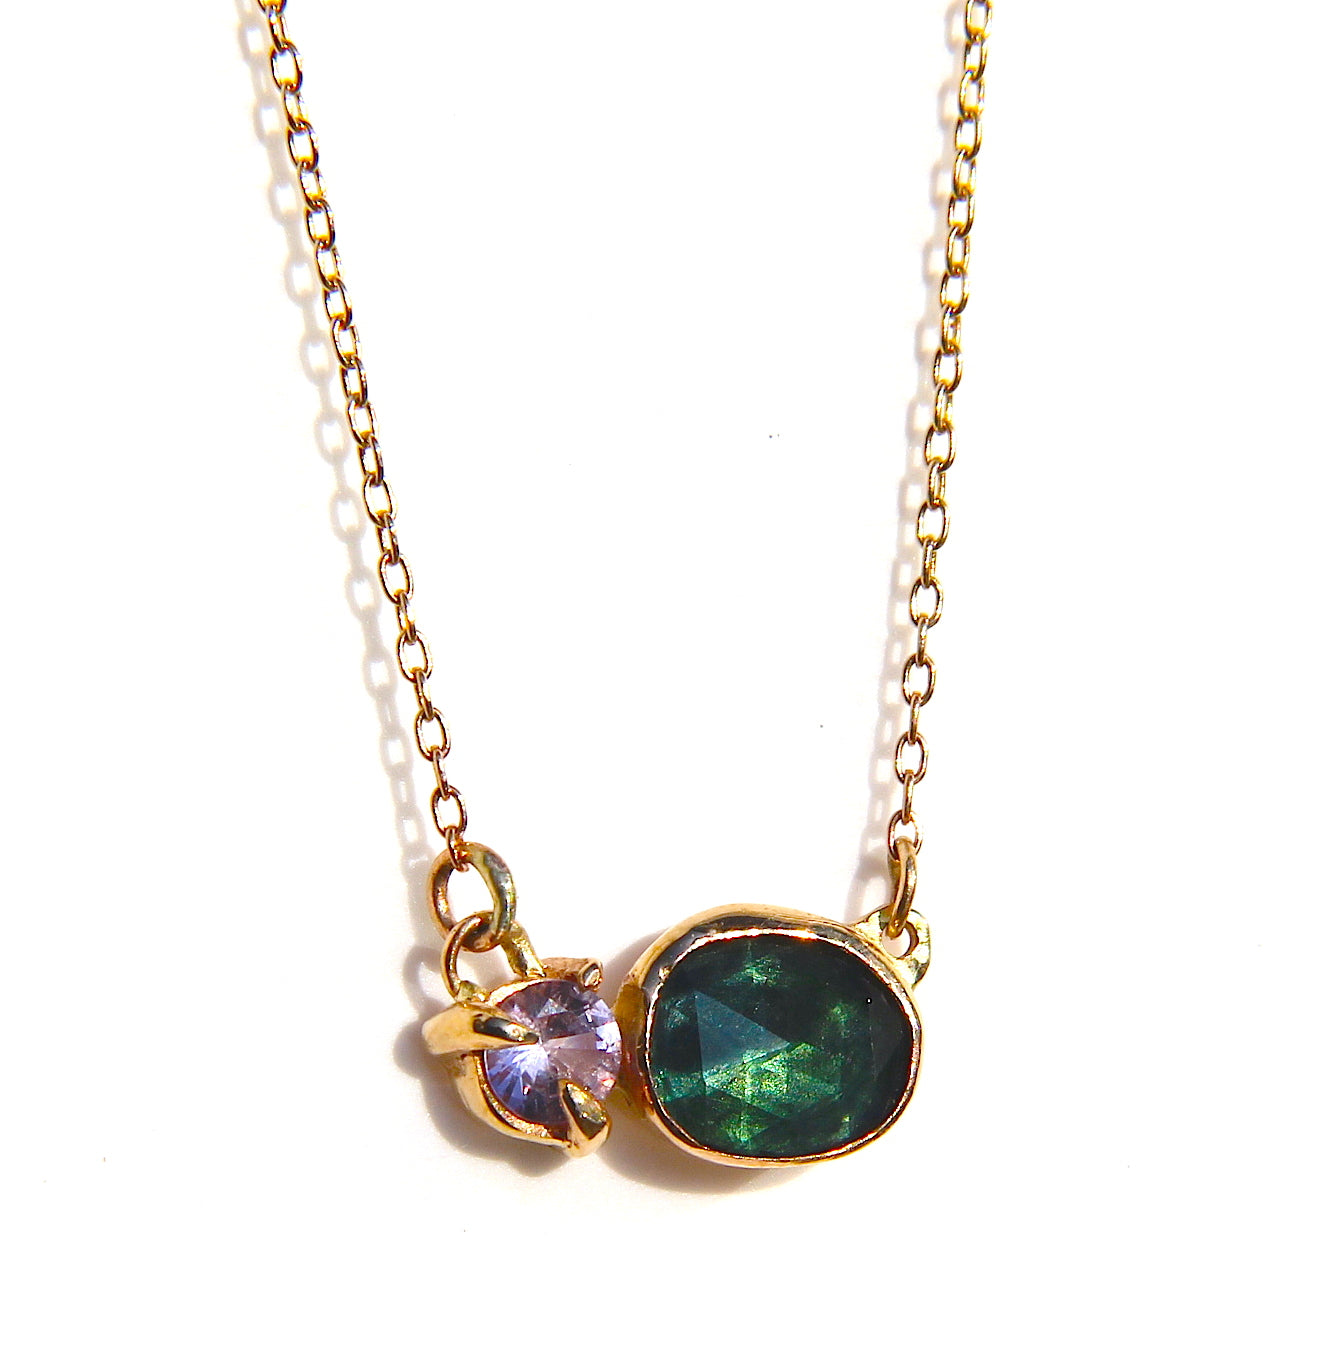 Lavender Spinel and Green Tourmaline Necklace